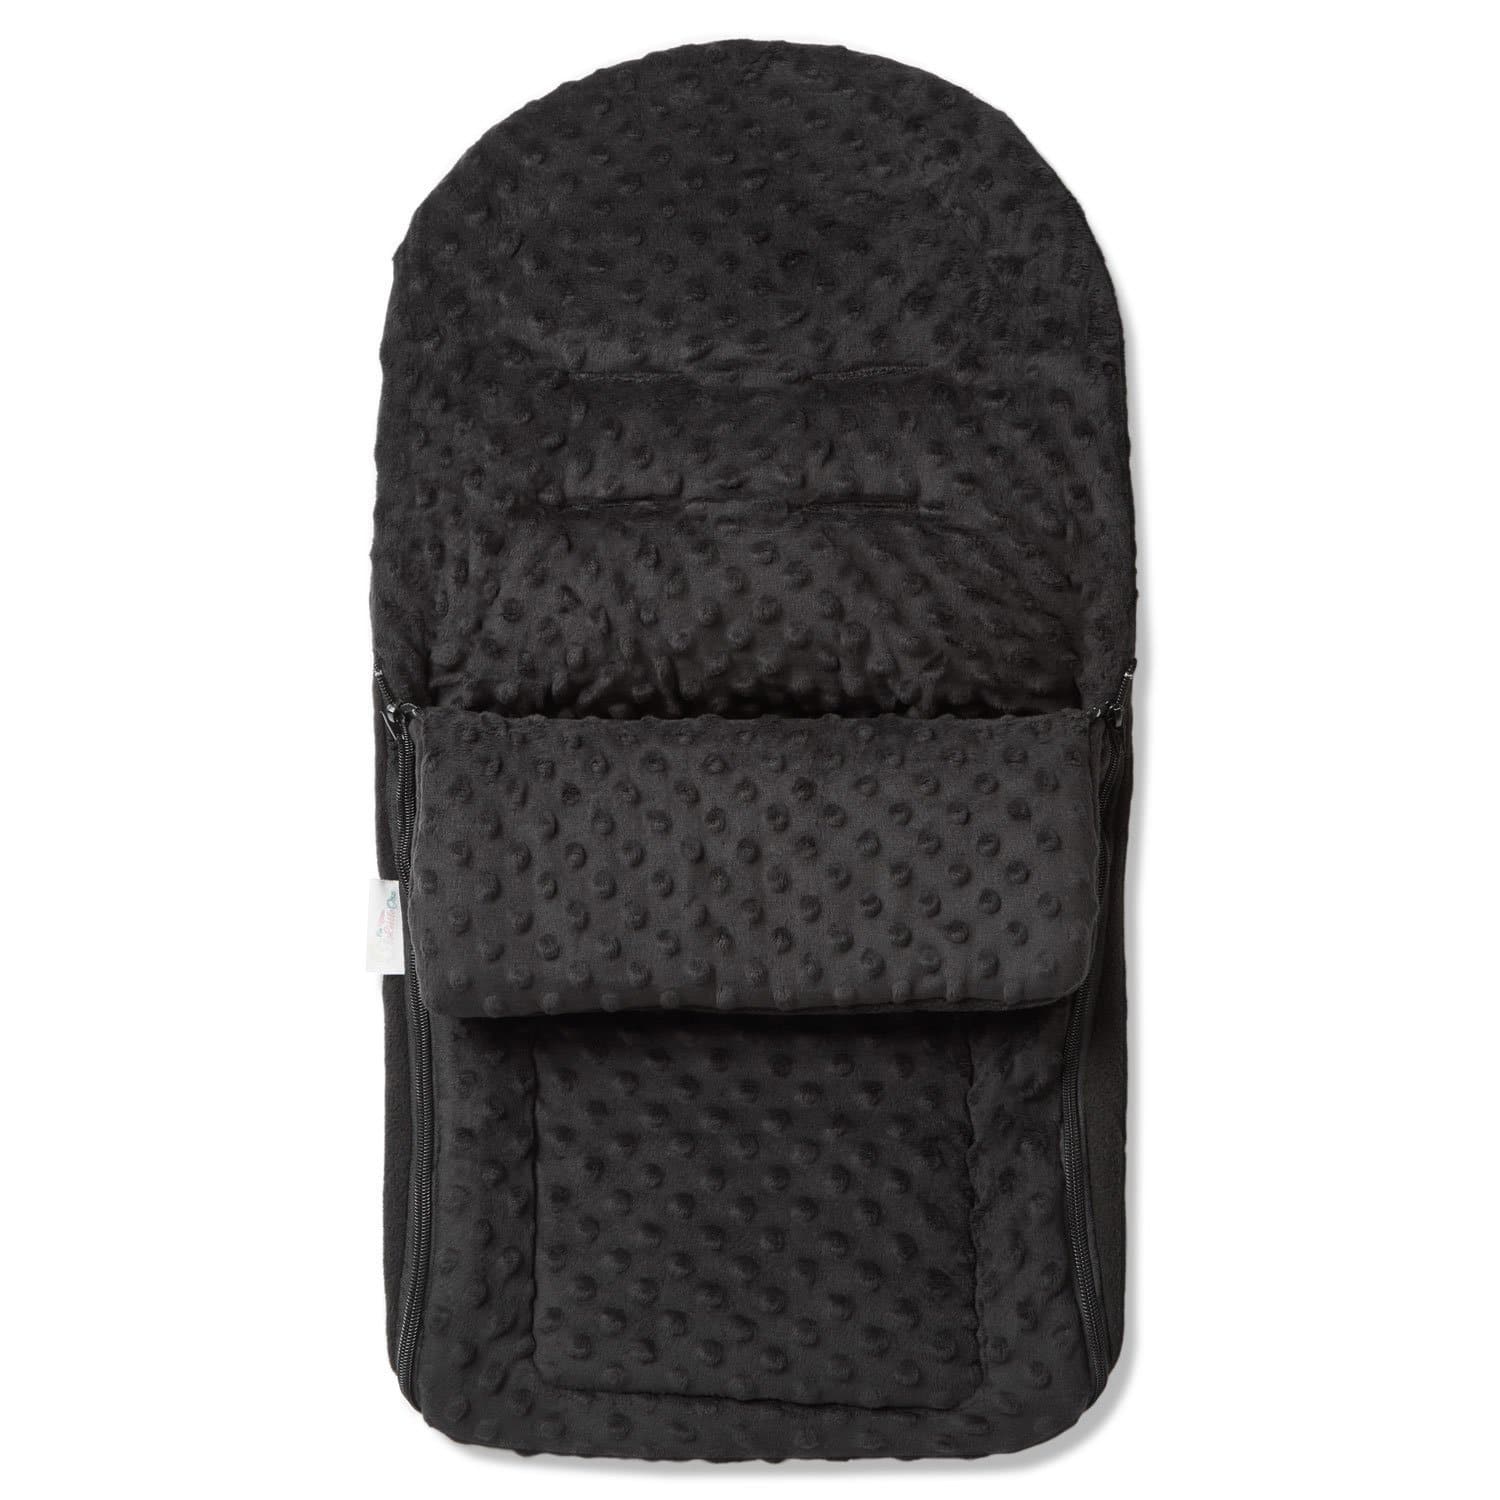 Dimple Car Seat Footmuff / Cosy Toes Compatible with Babystyle - For Your Little One